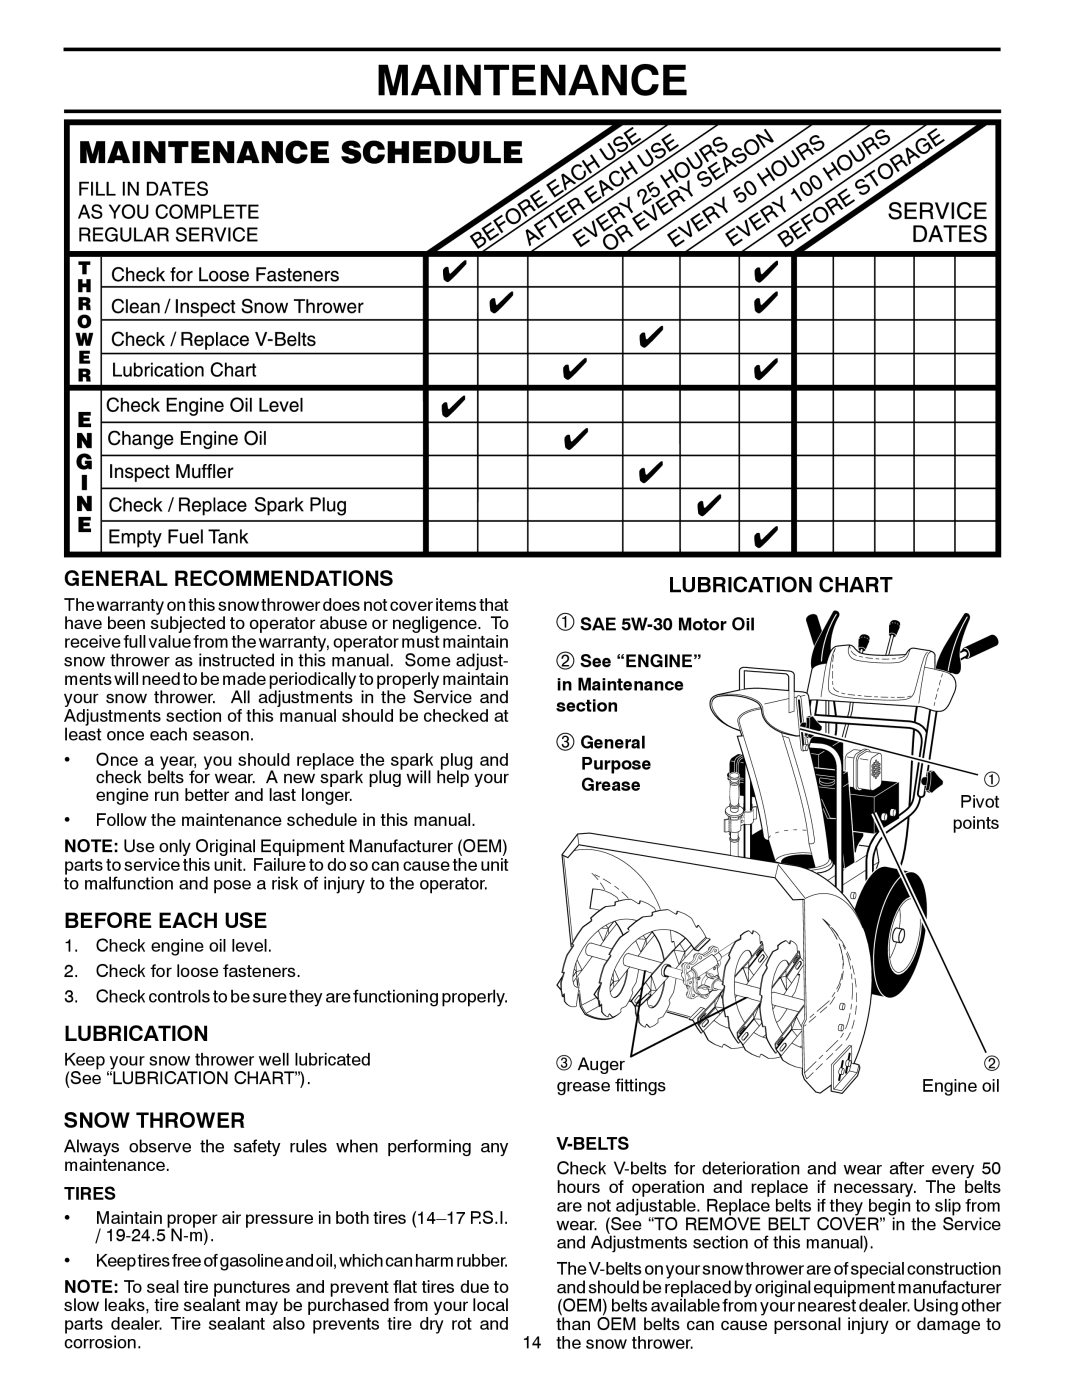 Poulan 418971 Maintenance, General Recommendations, Before Each Use, Lubrication Chart, Snow Thrower, Purpose Grease 